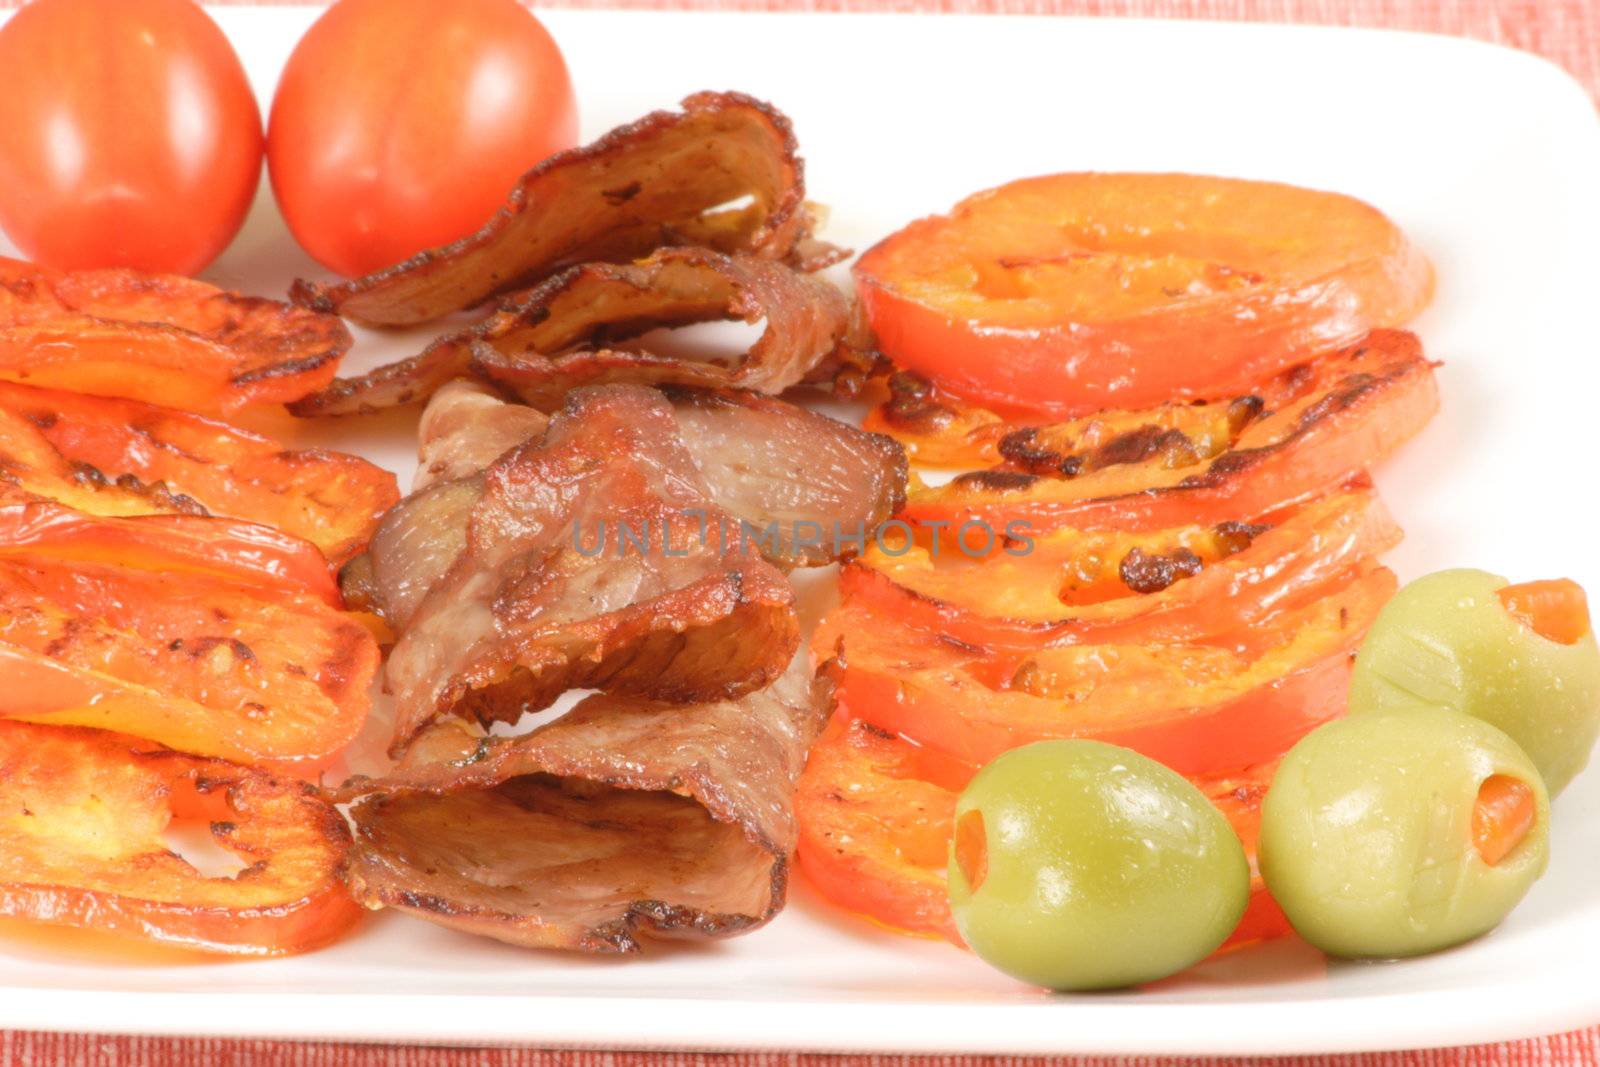 olive oil  fried  beef  and  tomatoes  by tacar